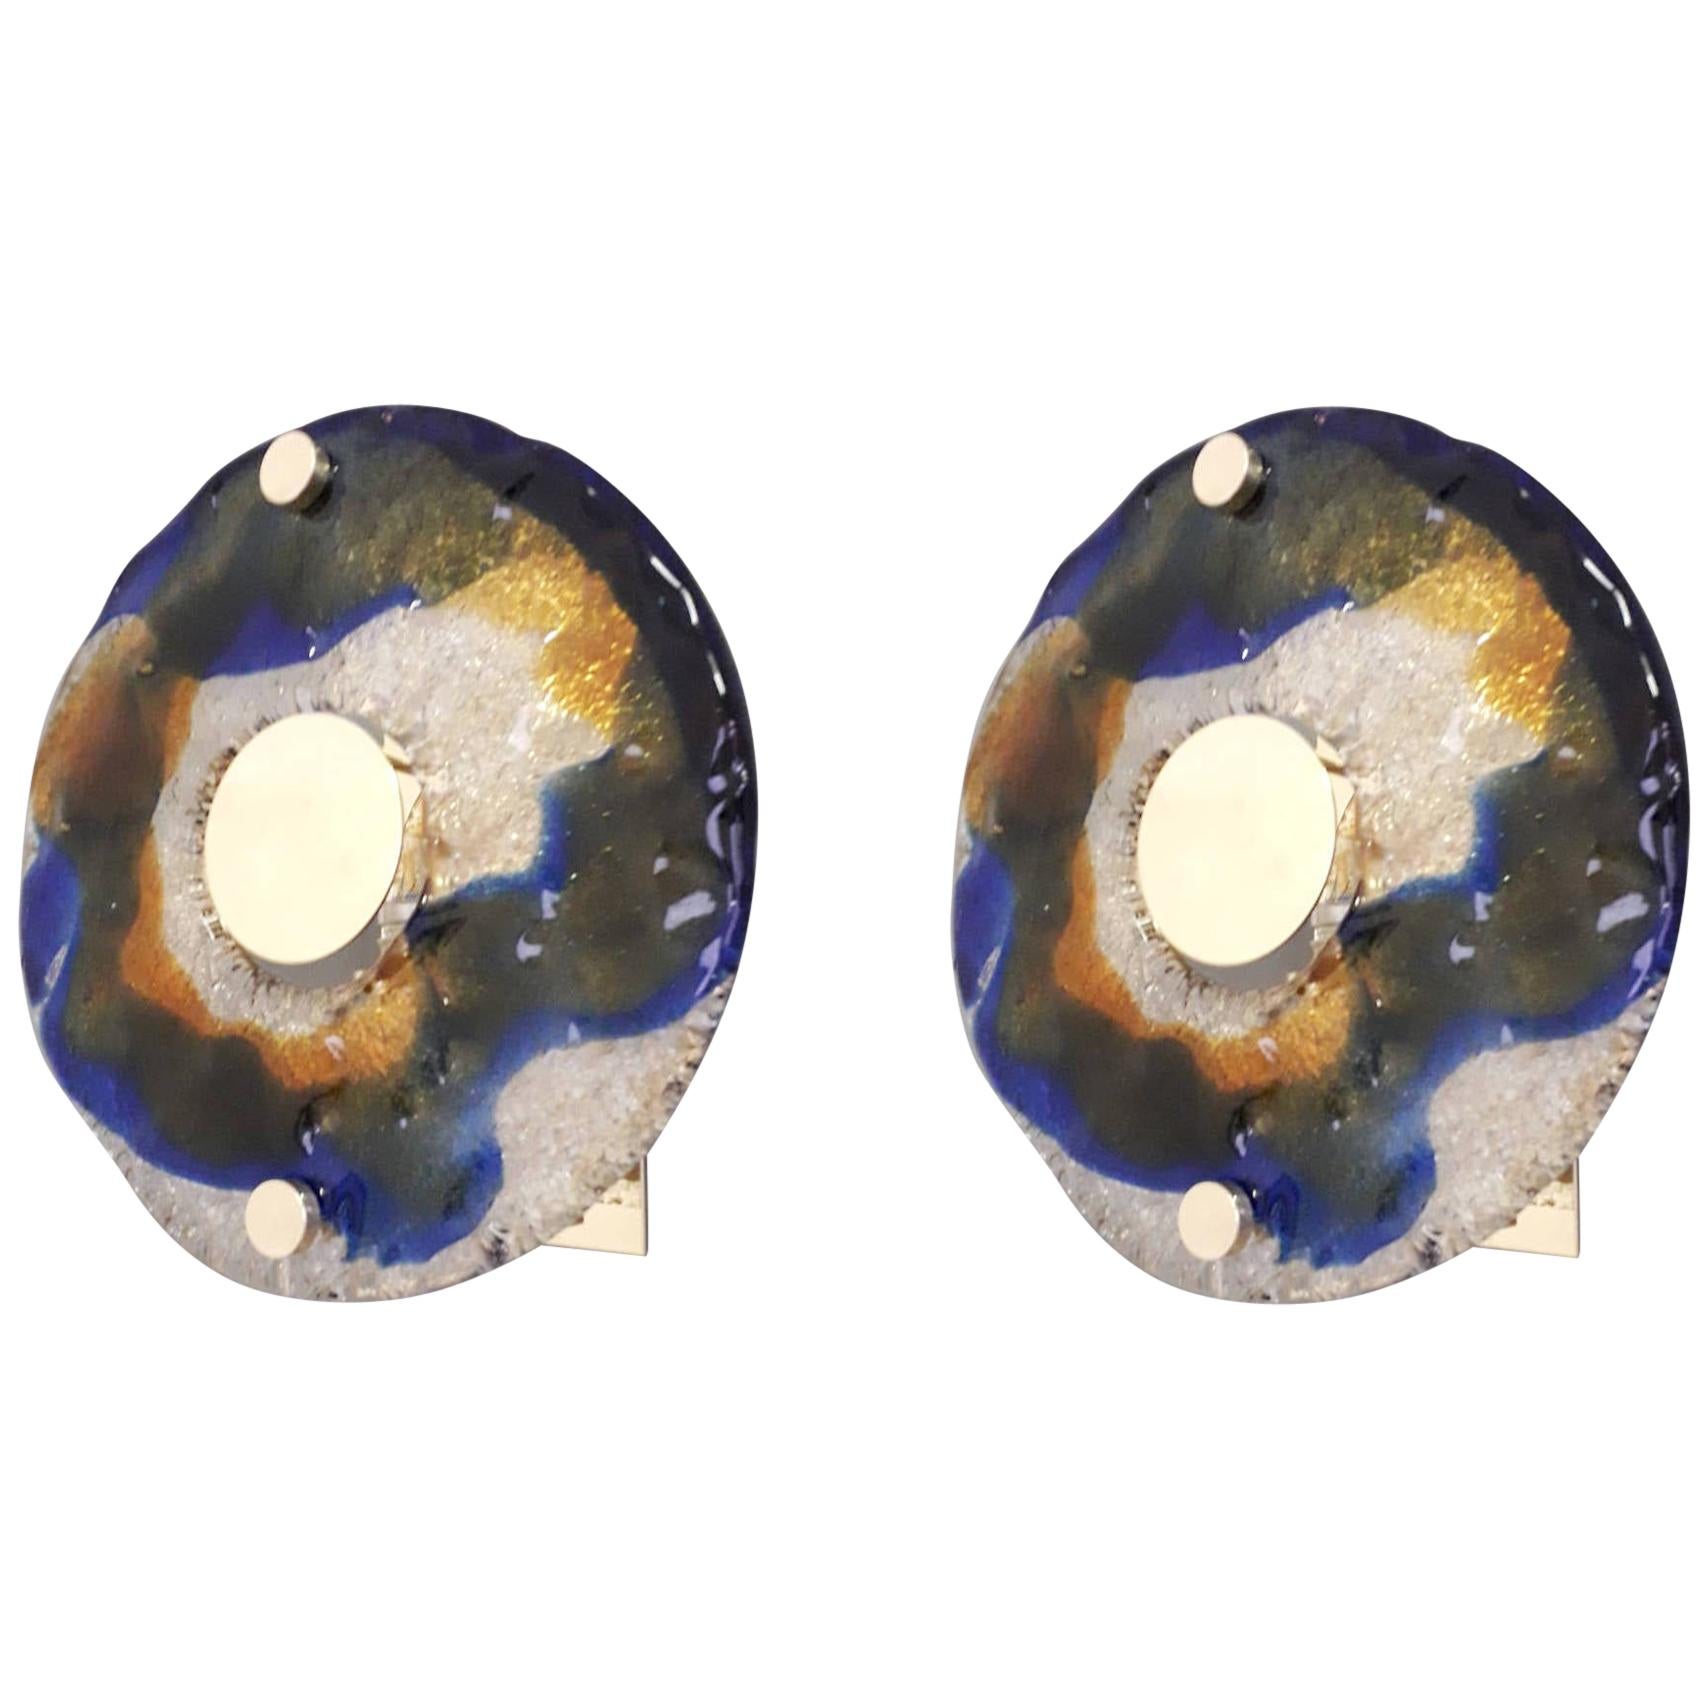 Pair of Round Sconces by Barovier e Toso, 2 Pairs Available